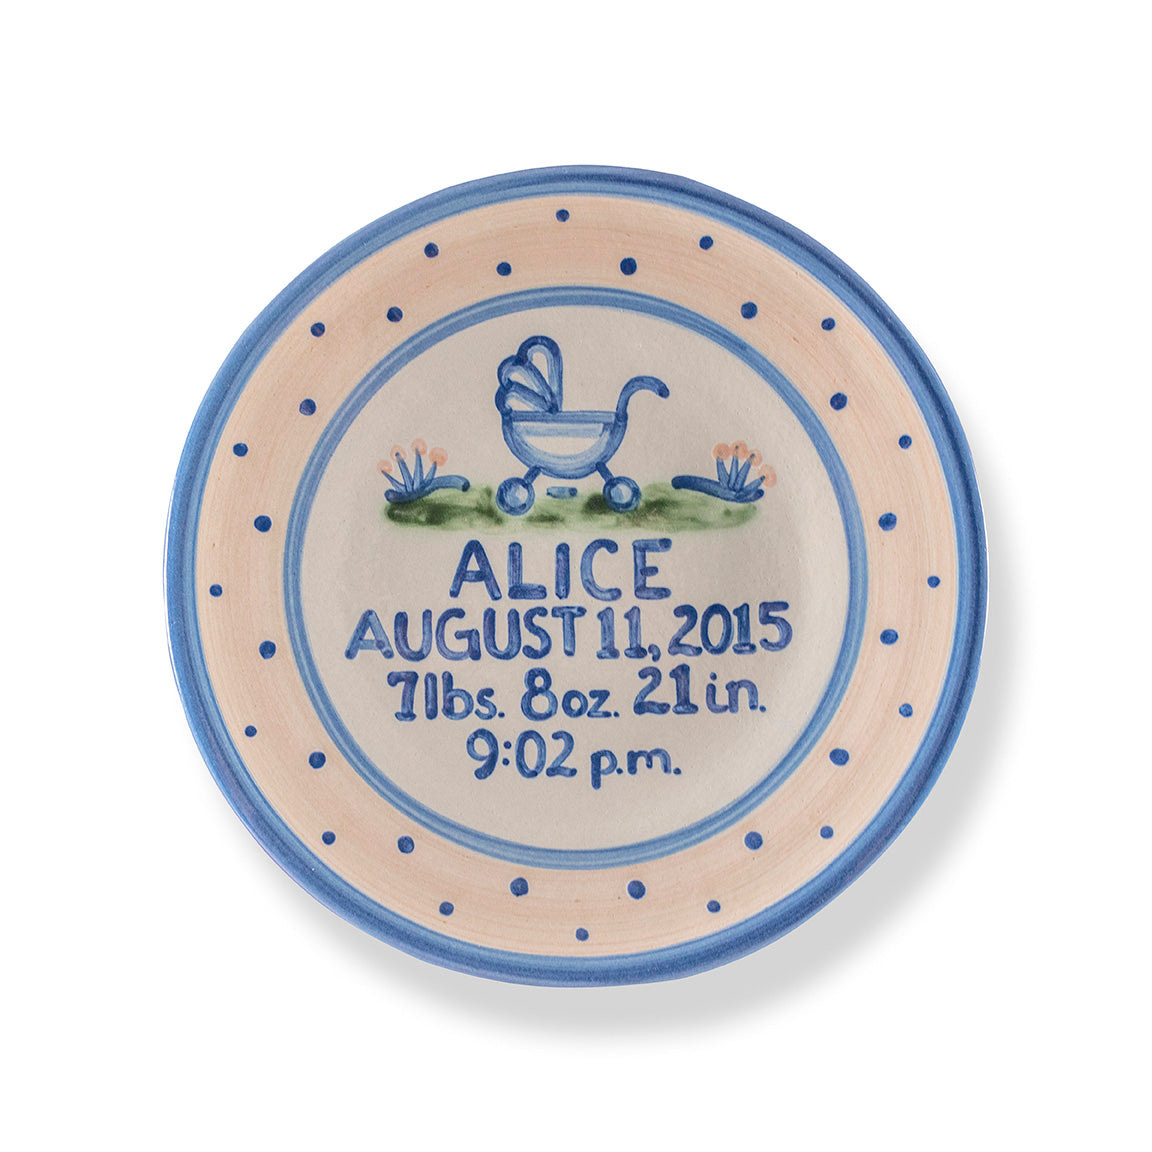 Premium Personalized Birth Plate - Baby Buggy